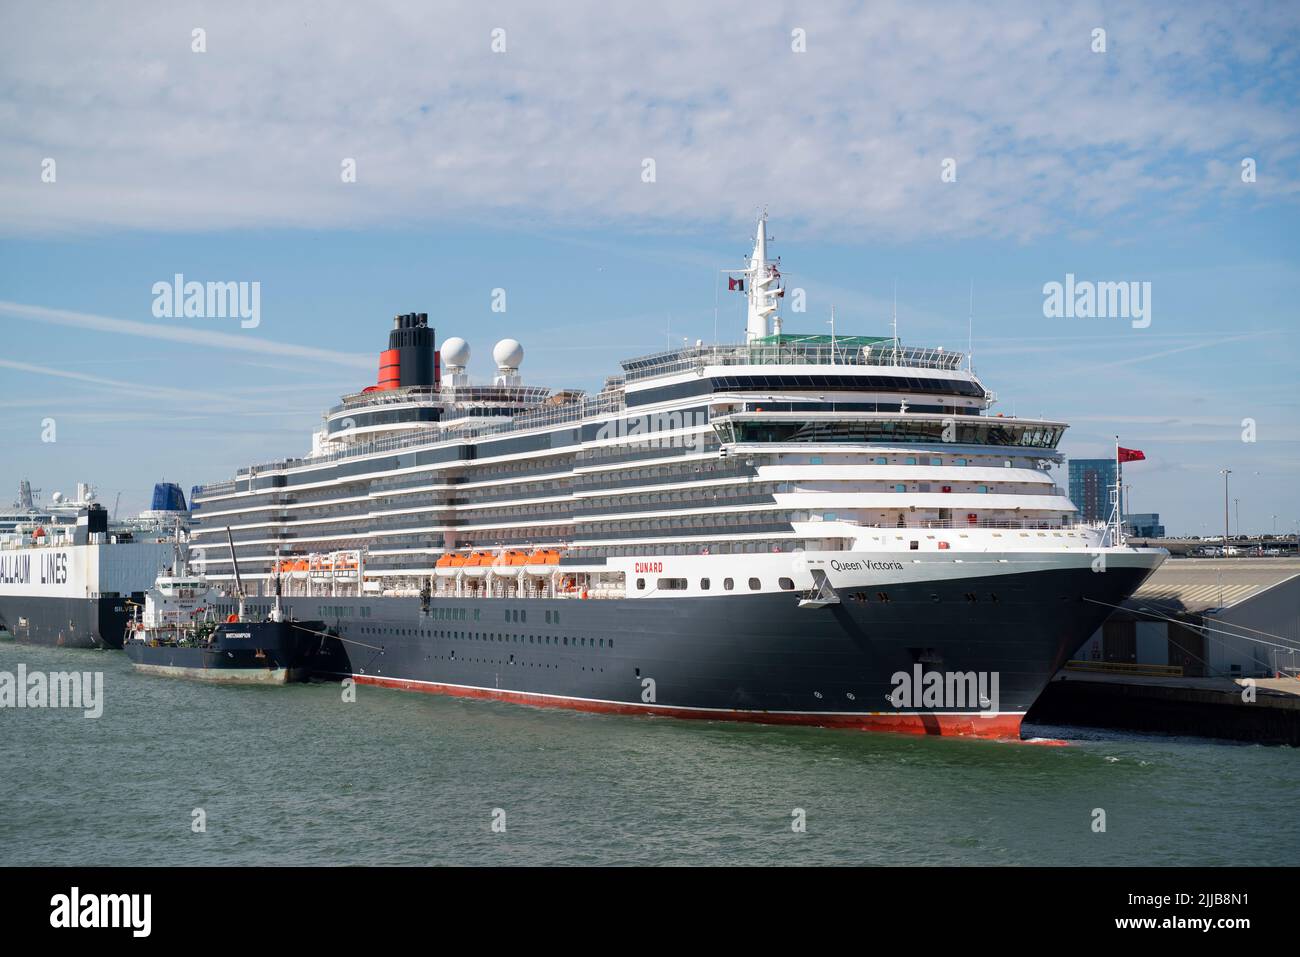 The Ms Queen Victoria A Vista Class Cruise Ship Operated By Cunard